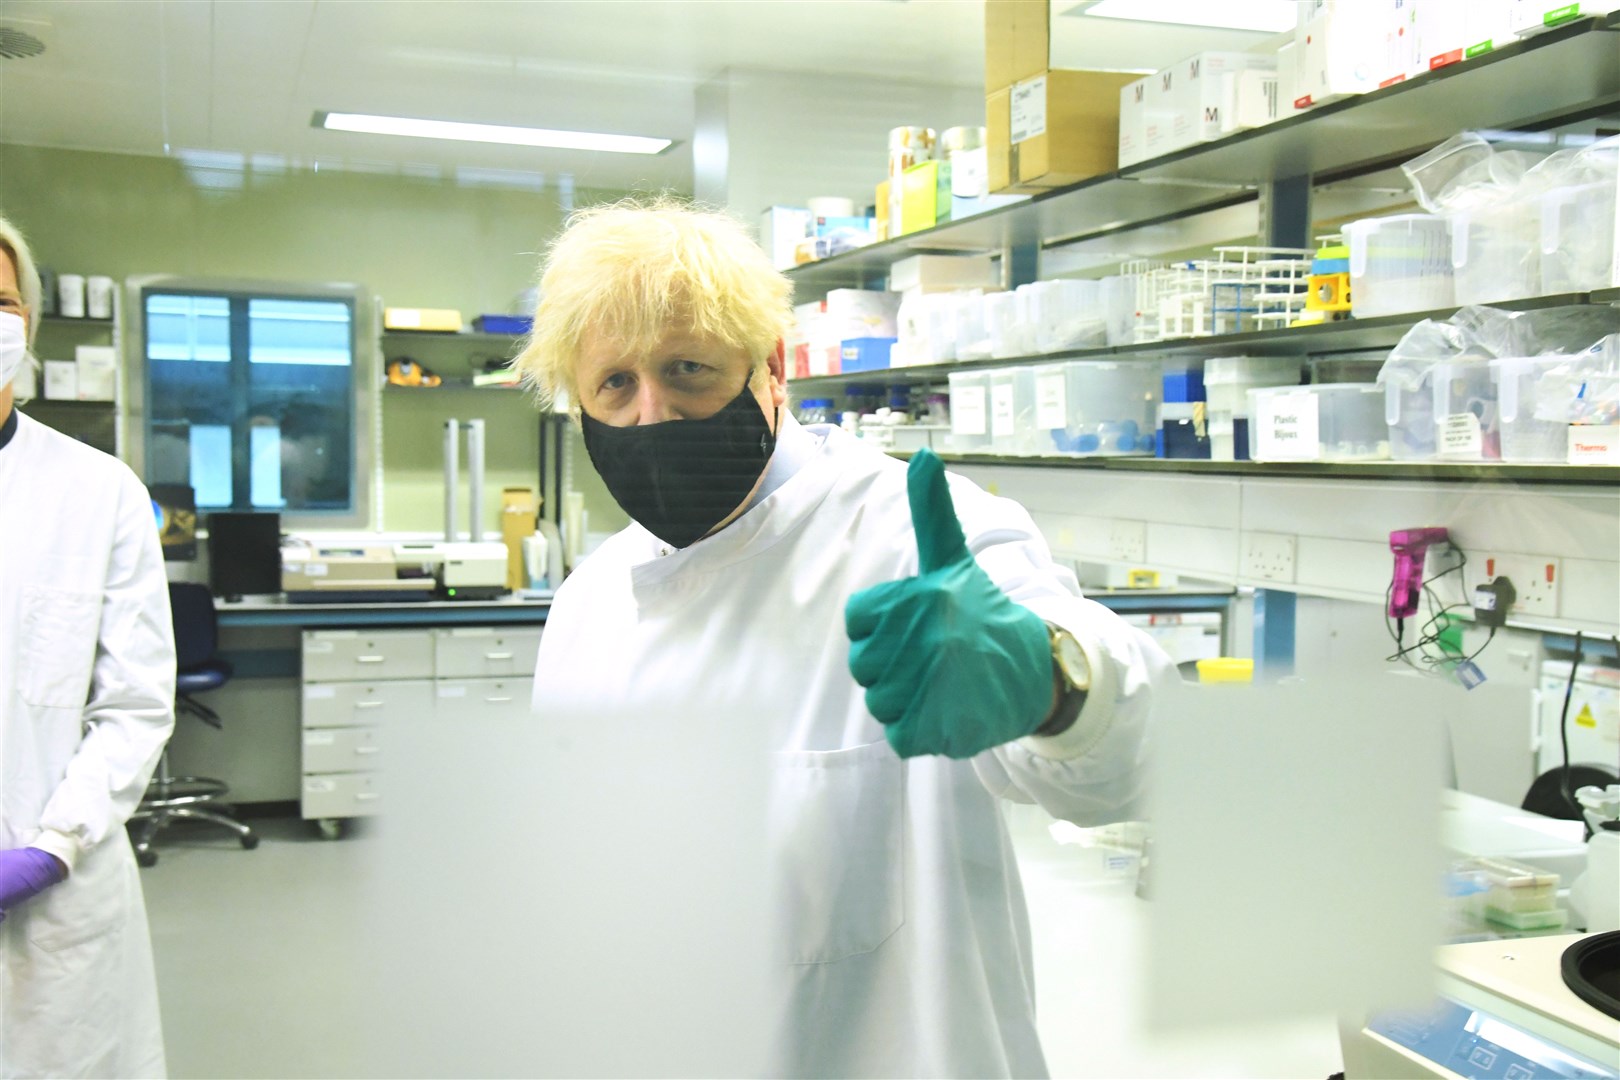 Prime Minister Boris Johnson gives a thumbs up sign during a visit to the National Institute for Biological Standards (Jeremy Selwyn/Evening Standard/PA)